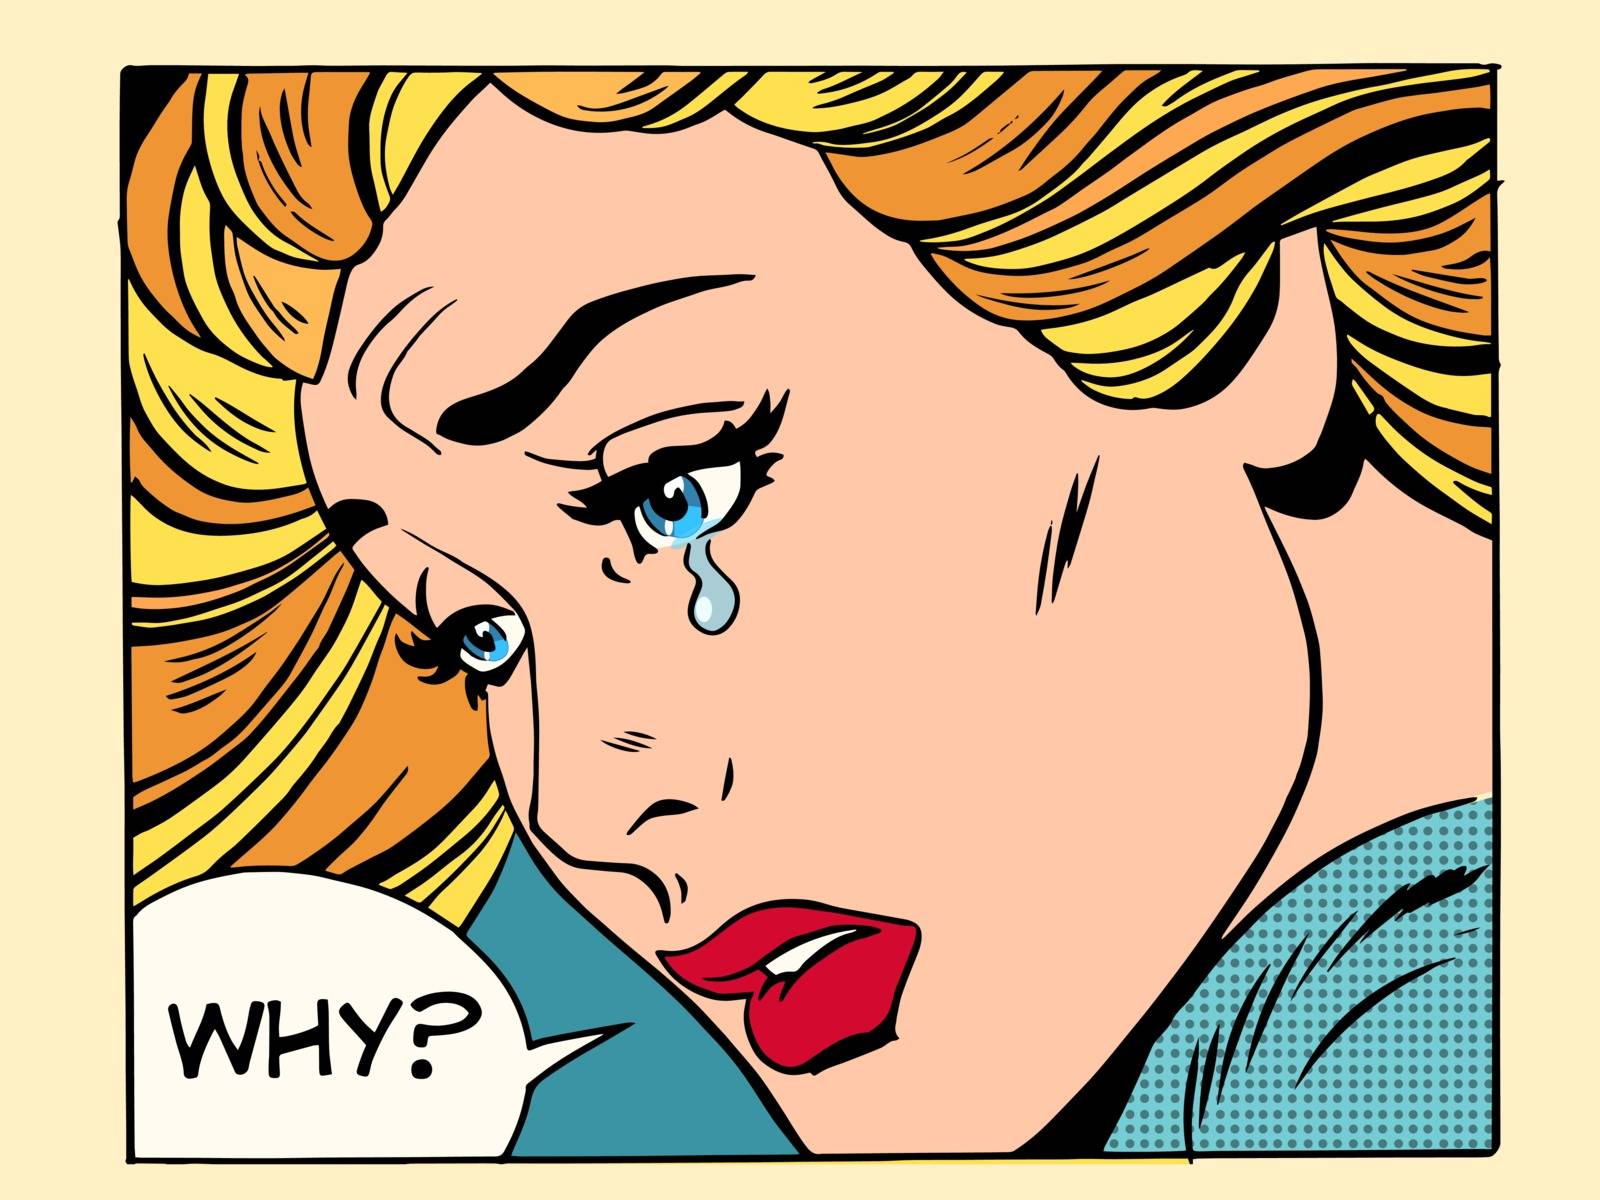 Why girl crying pop art retro style. Beautiful woman blonde. Human emotions sadness grief love